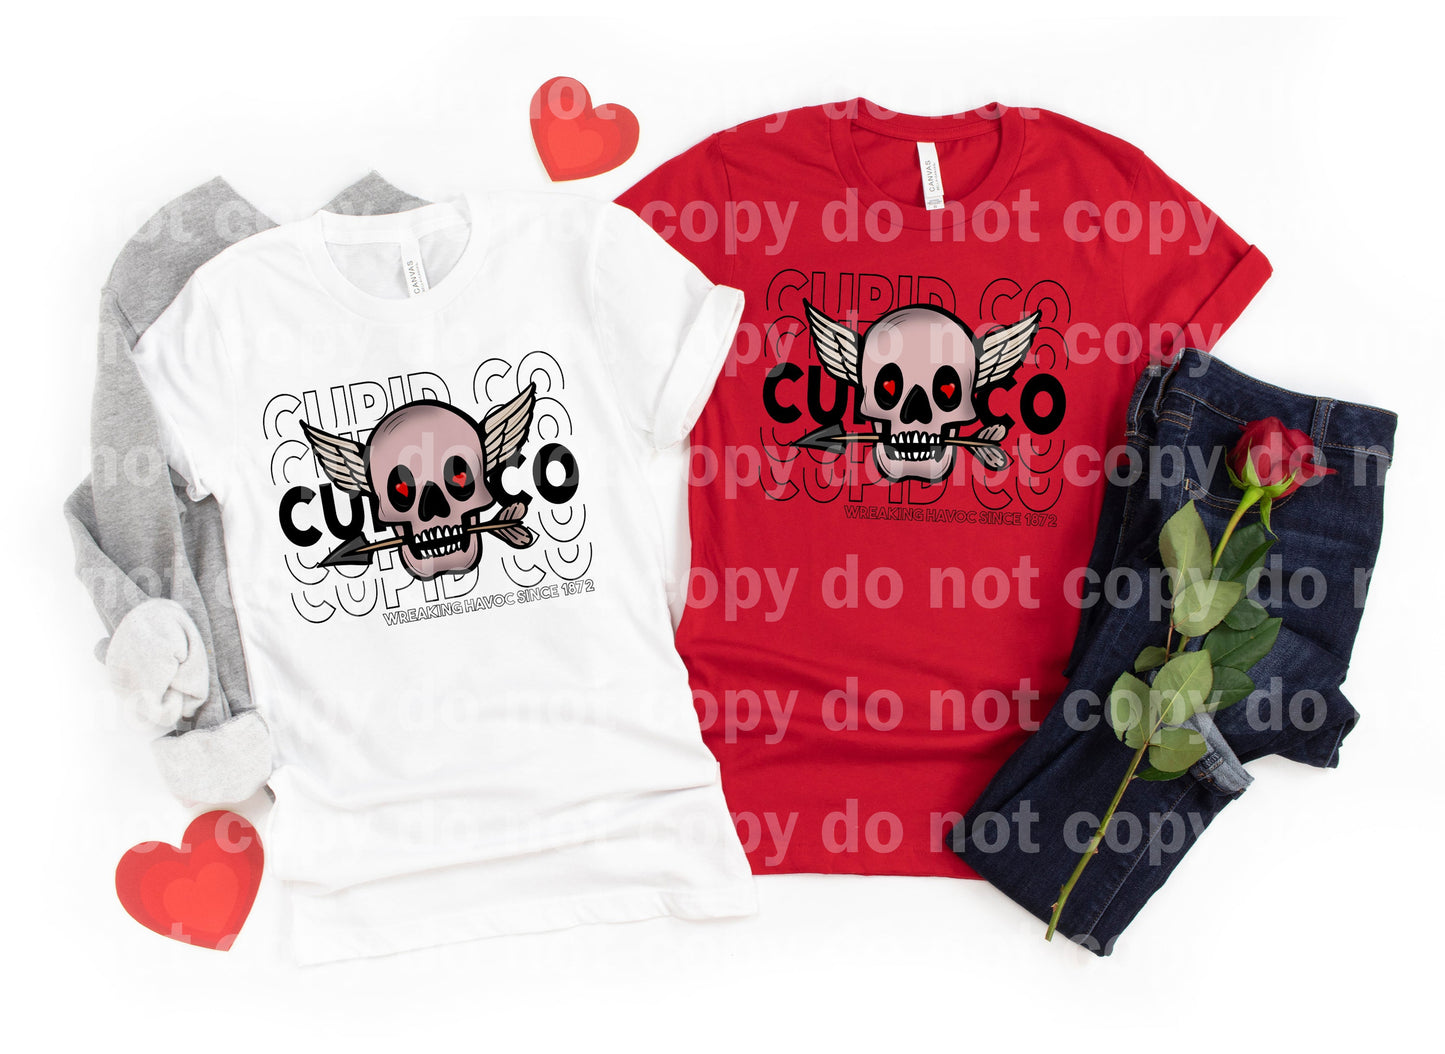 Cupid Co Dream Print or Sublimation Print